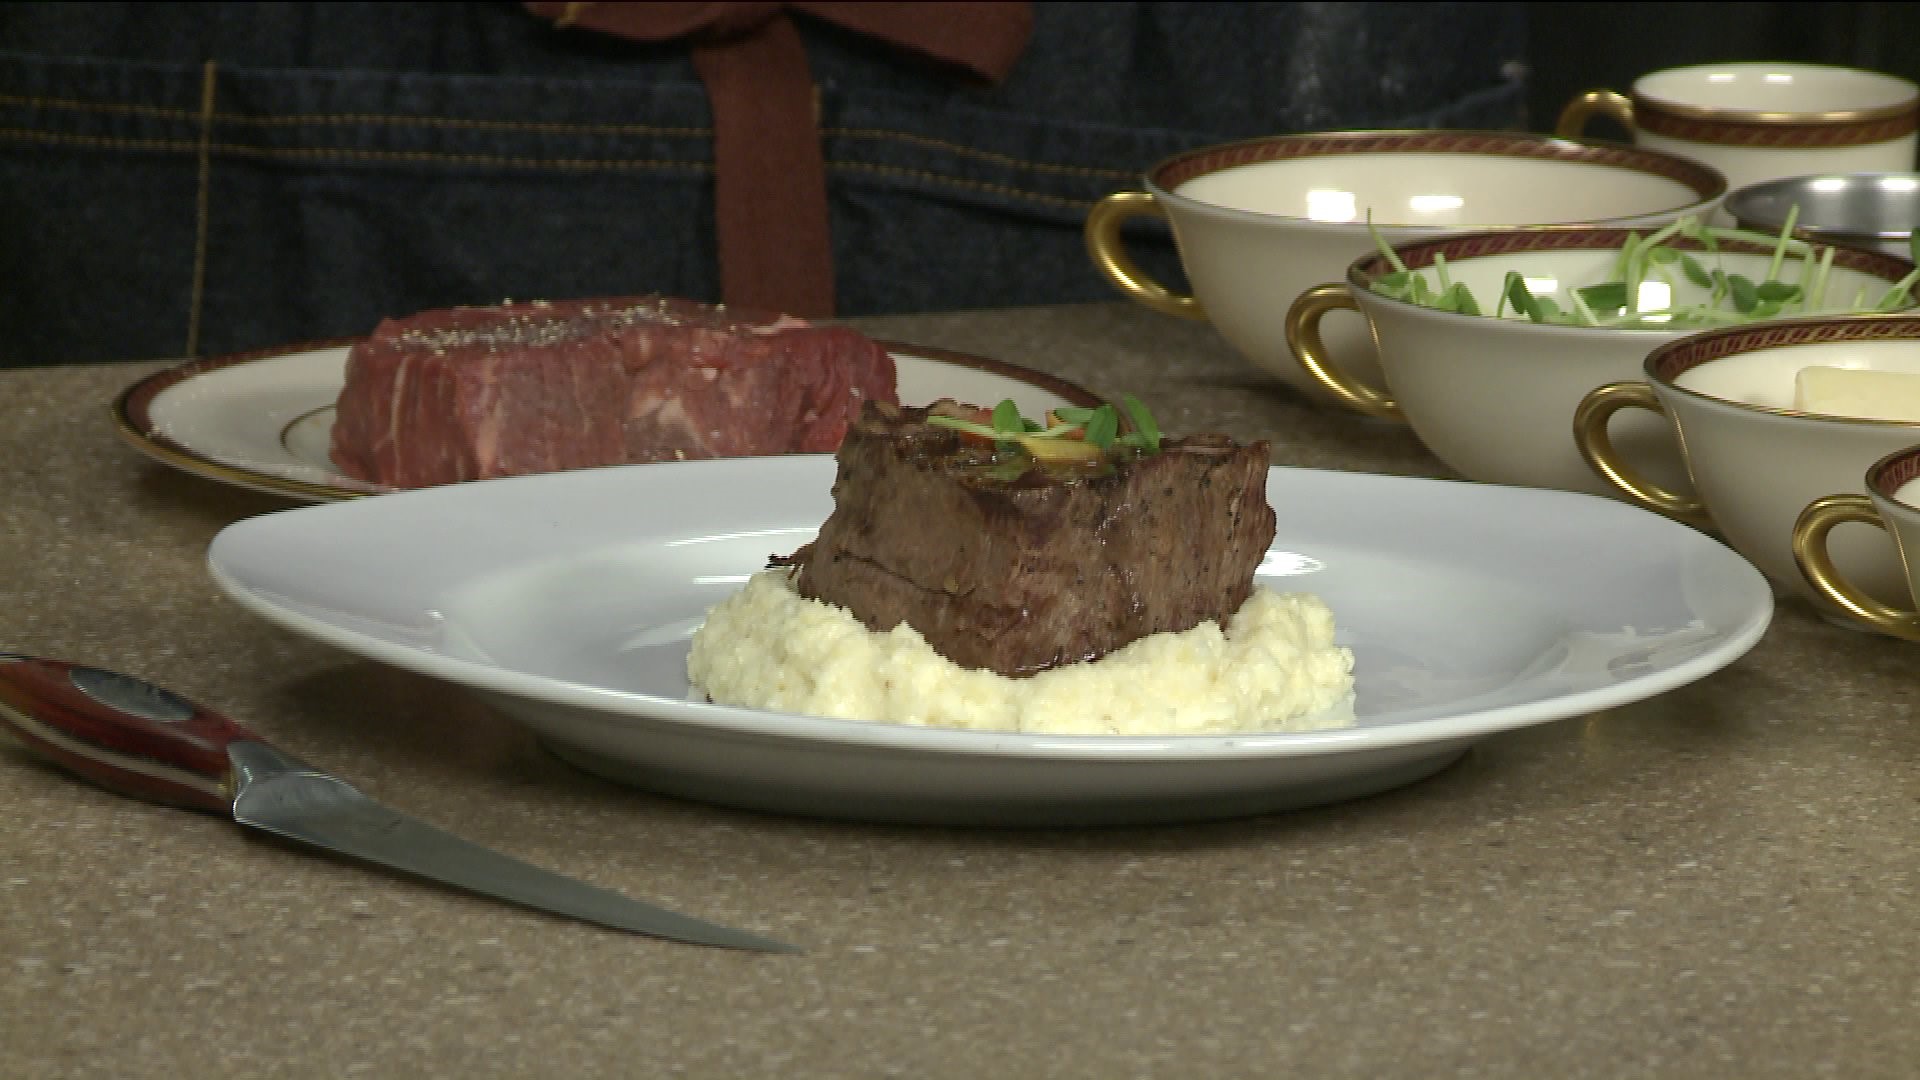 Recipe - Cast-iron seared filet of beef with Irish cheddar grits